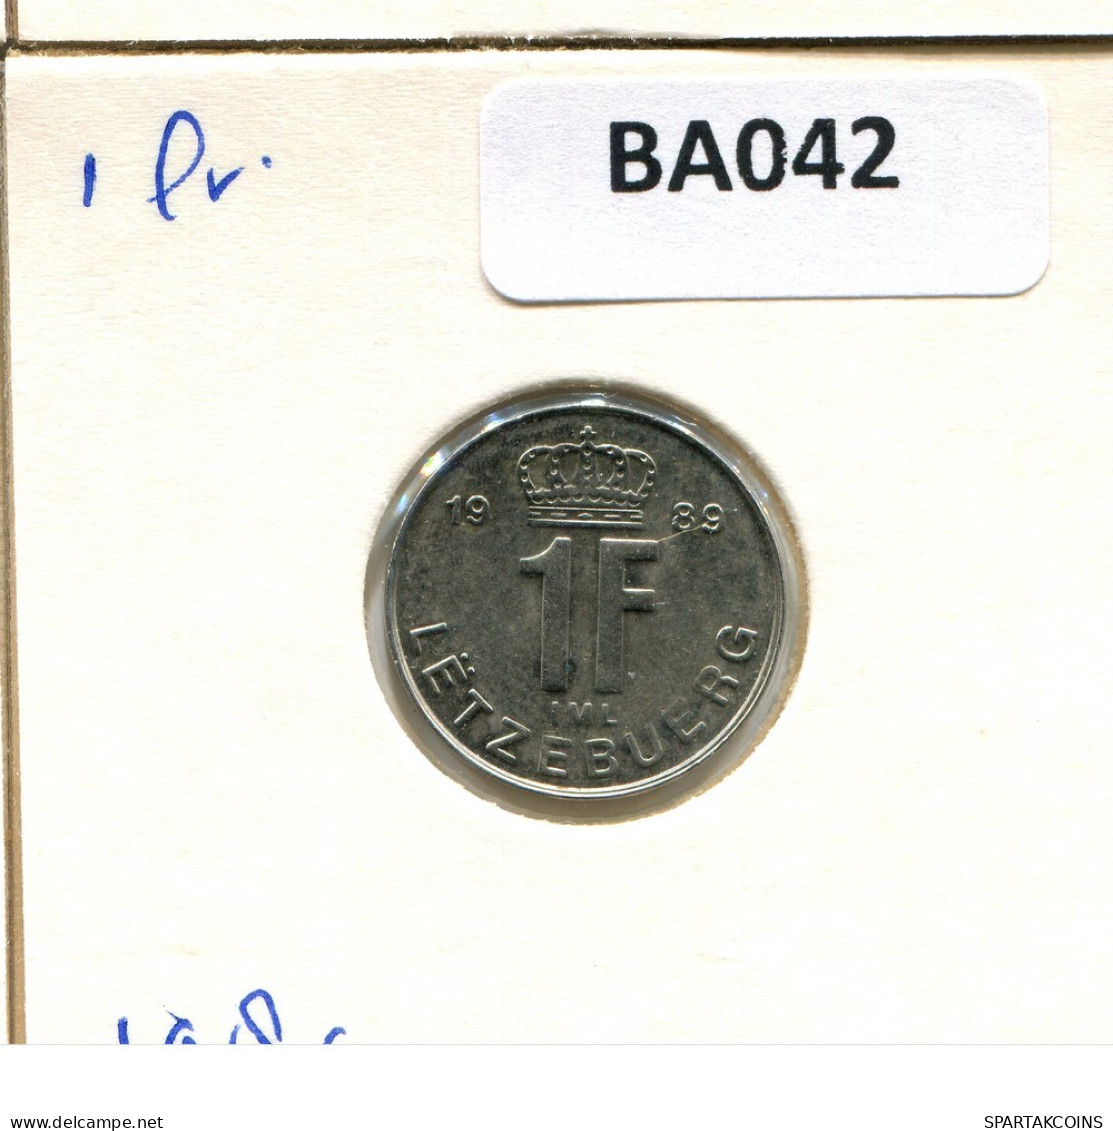 1 FRANC 1989 LUXEMBOURG Coin #BA042.U.A - Luxembourg